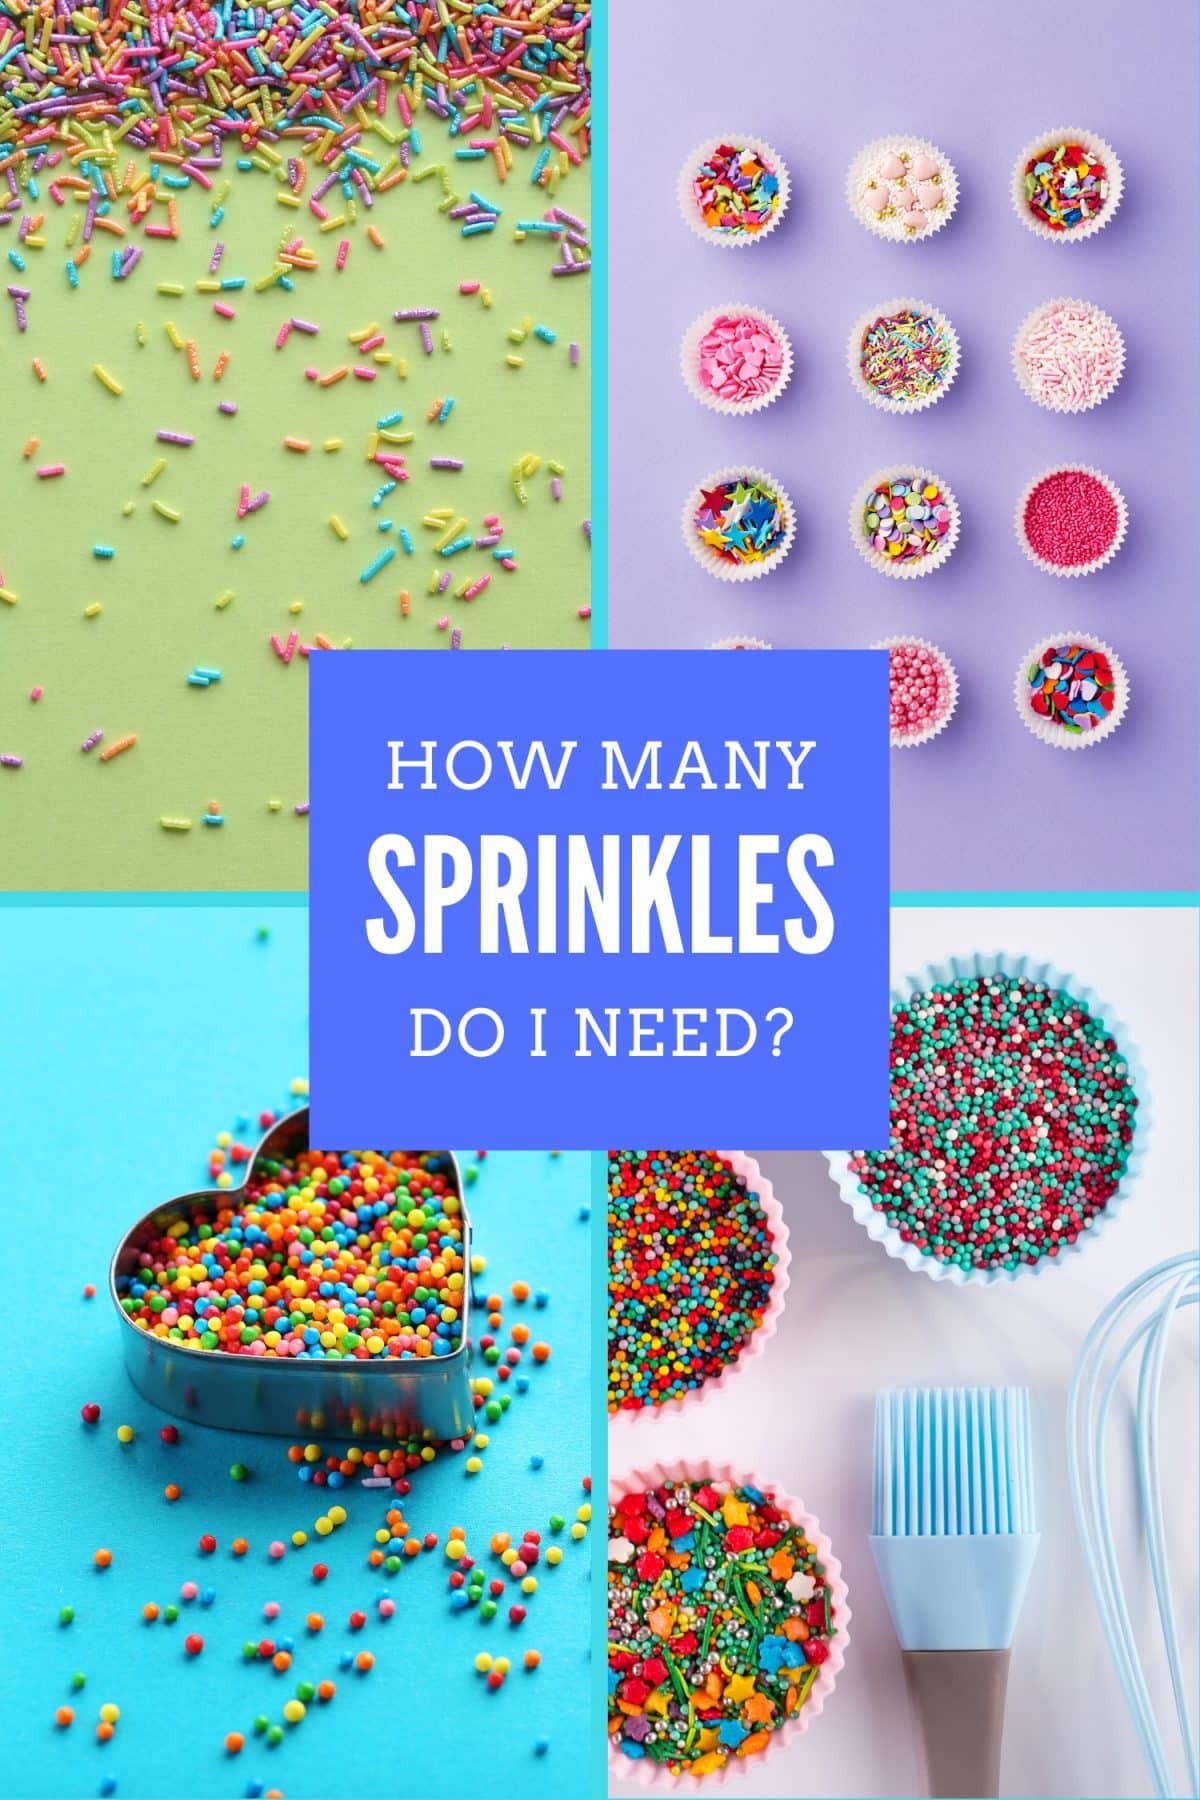 A comprehensive overview of exactly how many sprinkles you need for your preferred method of decorating cupcakes. via @frshaprilflours